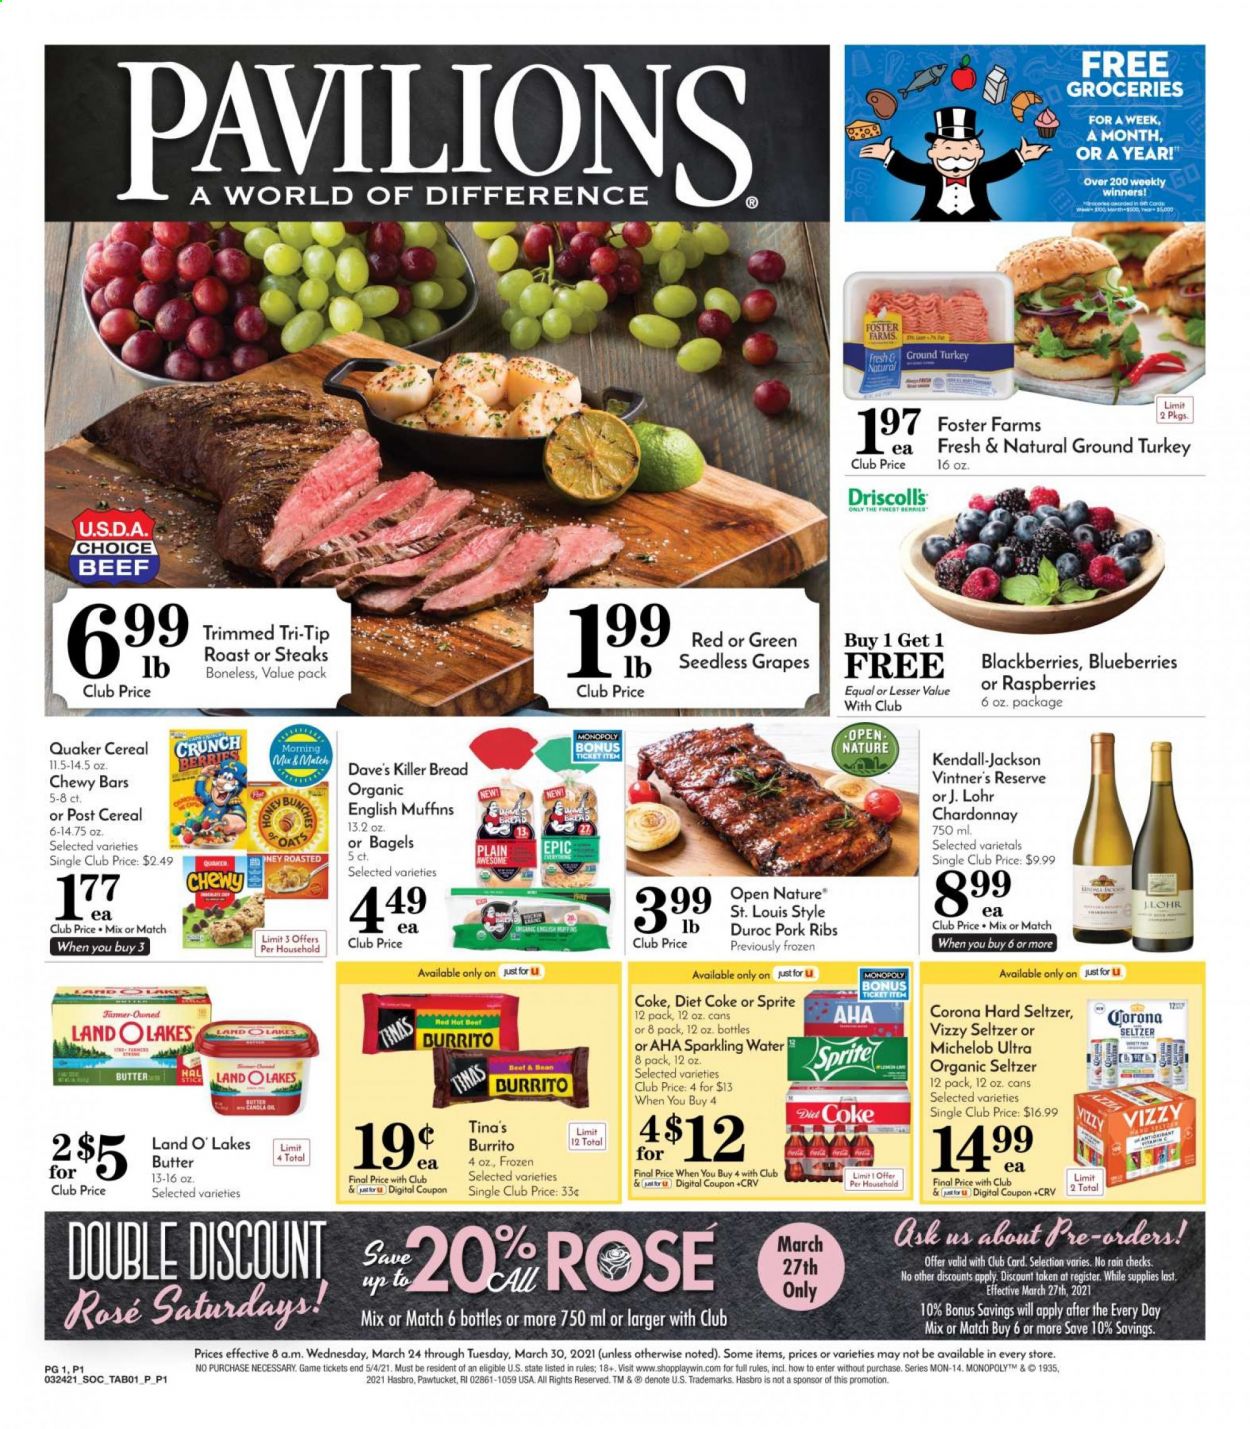 thumbnail - Pavilions Flyer - 03/24/2021 - 03/30/2021 - Sales products - Michelob, blackberries, blueberries, raspberries, seedless grapes, bread, bagels, muffin, english muffins, burrito, Quaker, butter, beans, oats, cereals, canola oil, Coca-Cola, Sprite, Diet Coke, seltzer water, sparkling water, Chardonnay, wine, Hard Seltzer, beer, Corona Extra, ground turkey, steak, pork meat, pork ribs, Monopoly, Hasbro, rose, vitamin c, grapes. Page 1.